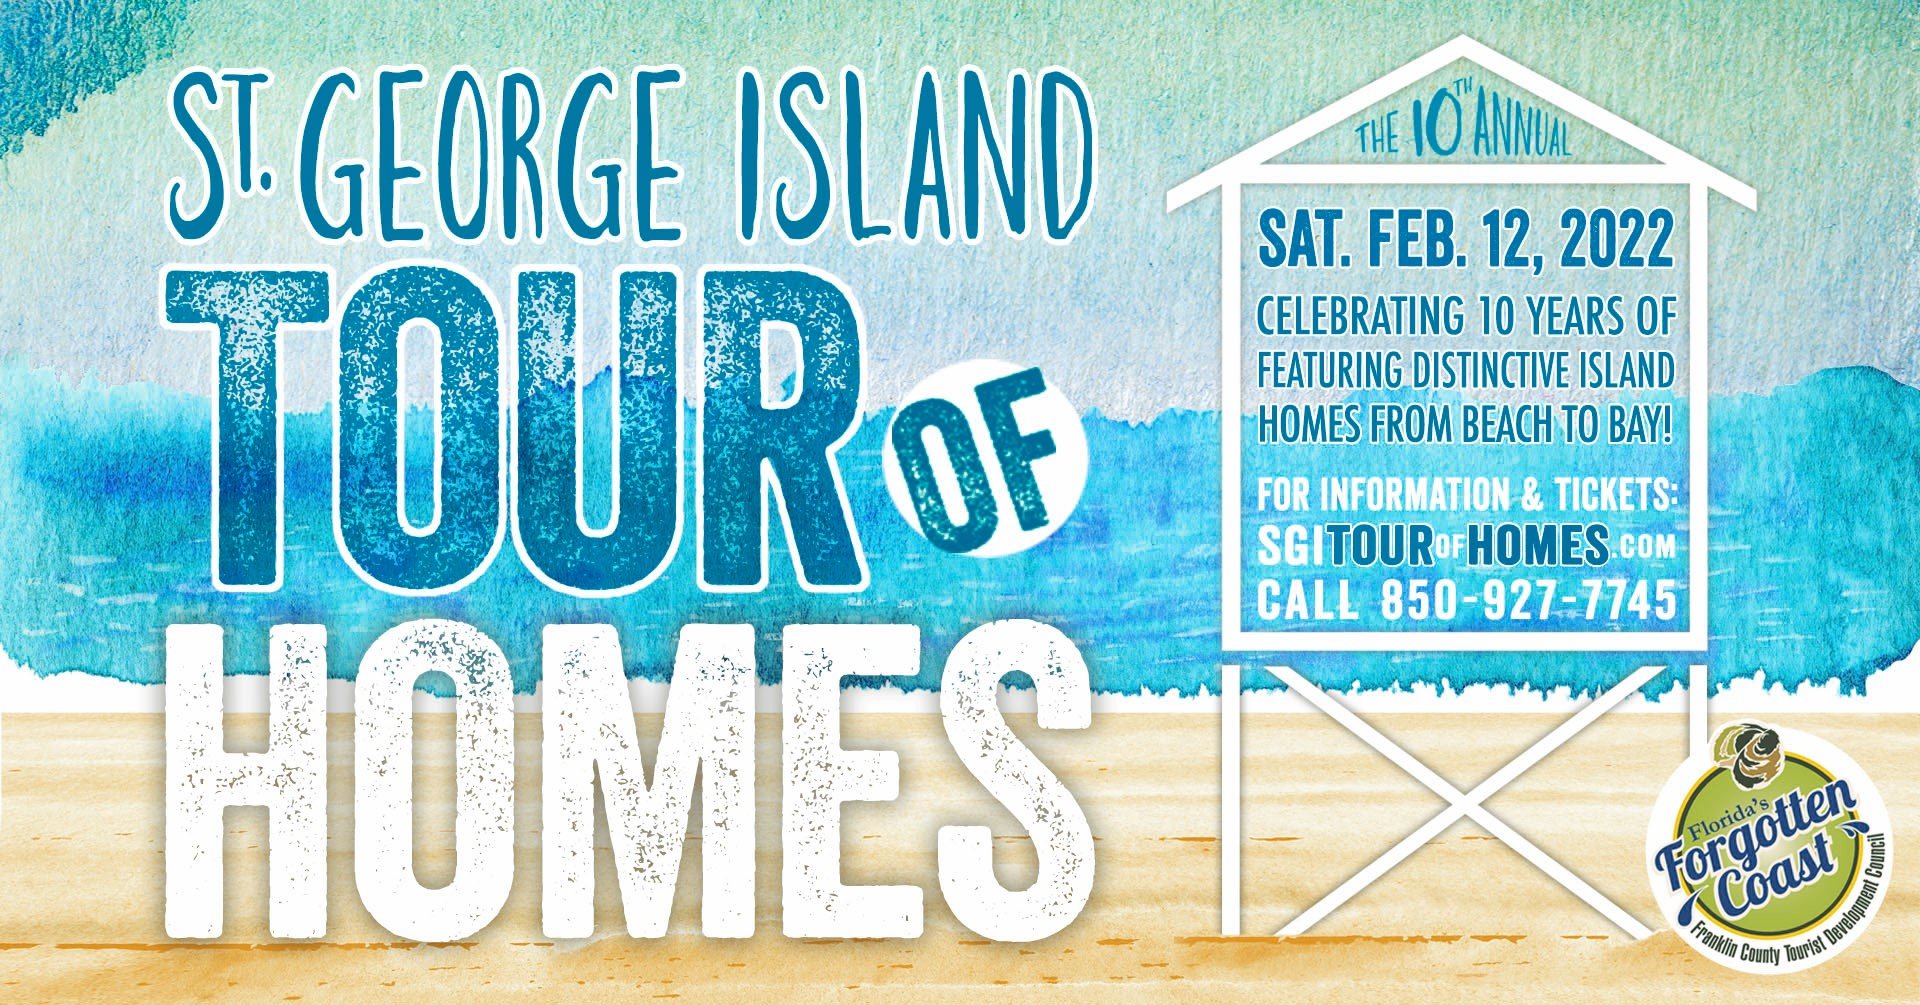 Flyer for the St. George Island Florida Tour of Homes February 12, 2022